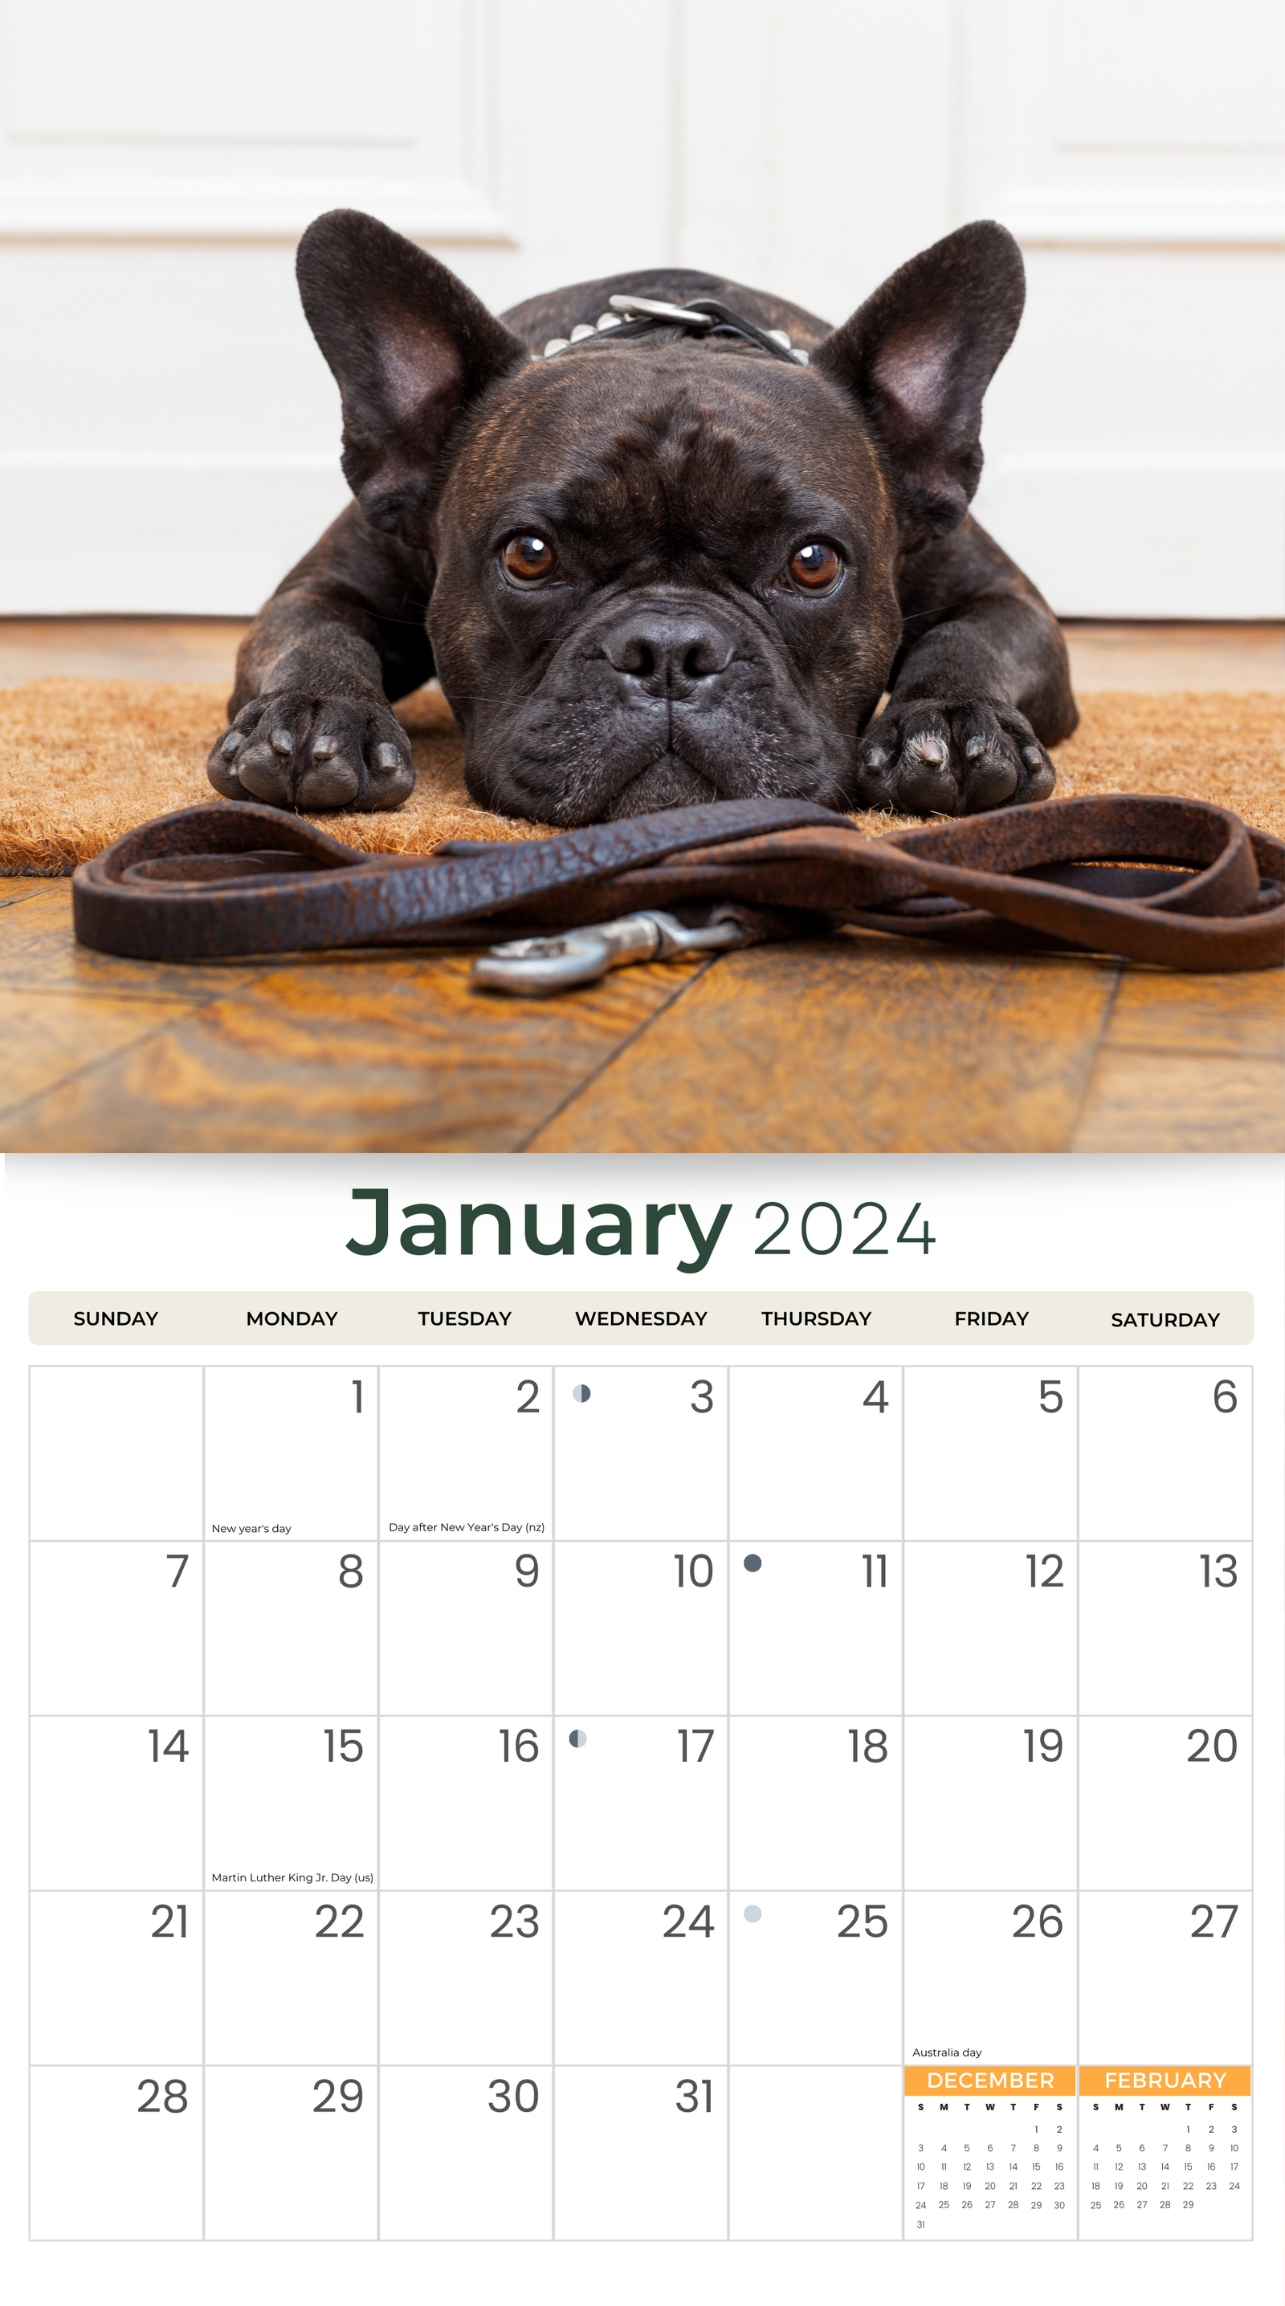 2024 French Bulldogs Dogs & Puppies - Deluxe Wall Calendar by Just Calendars - 16 Month - Plastic Free